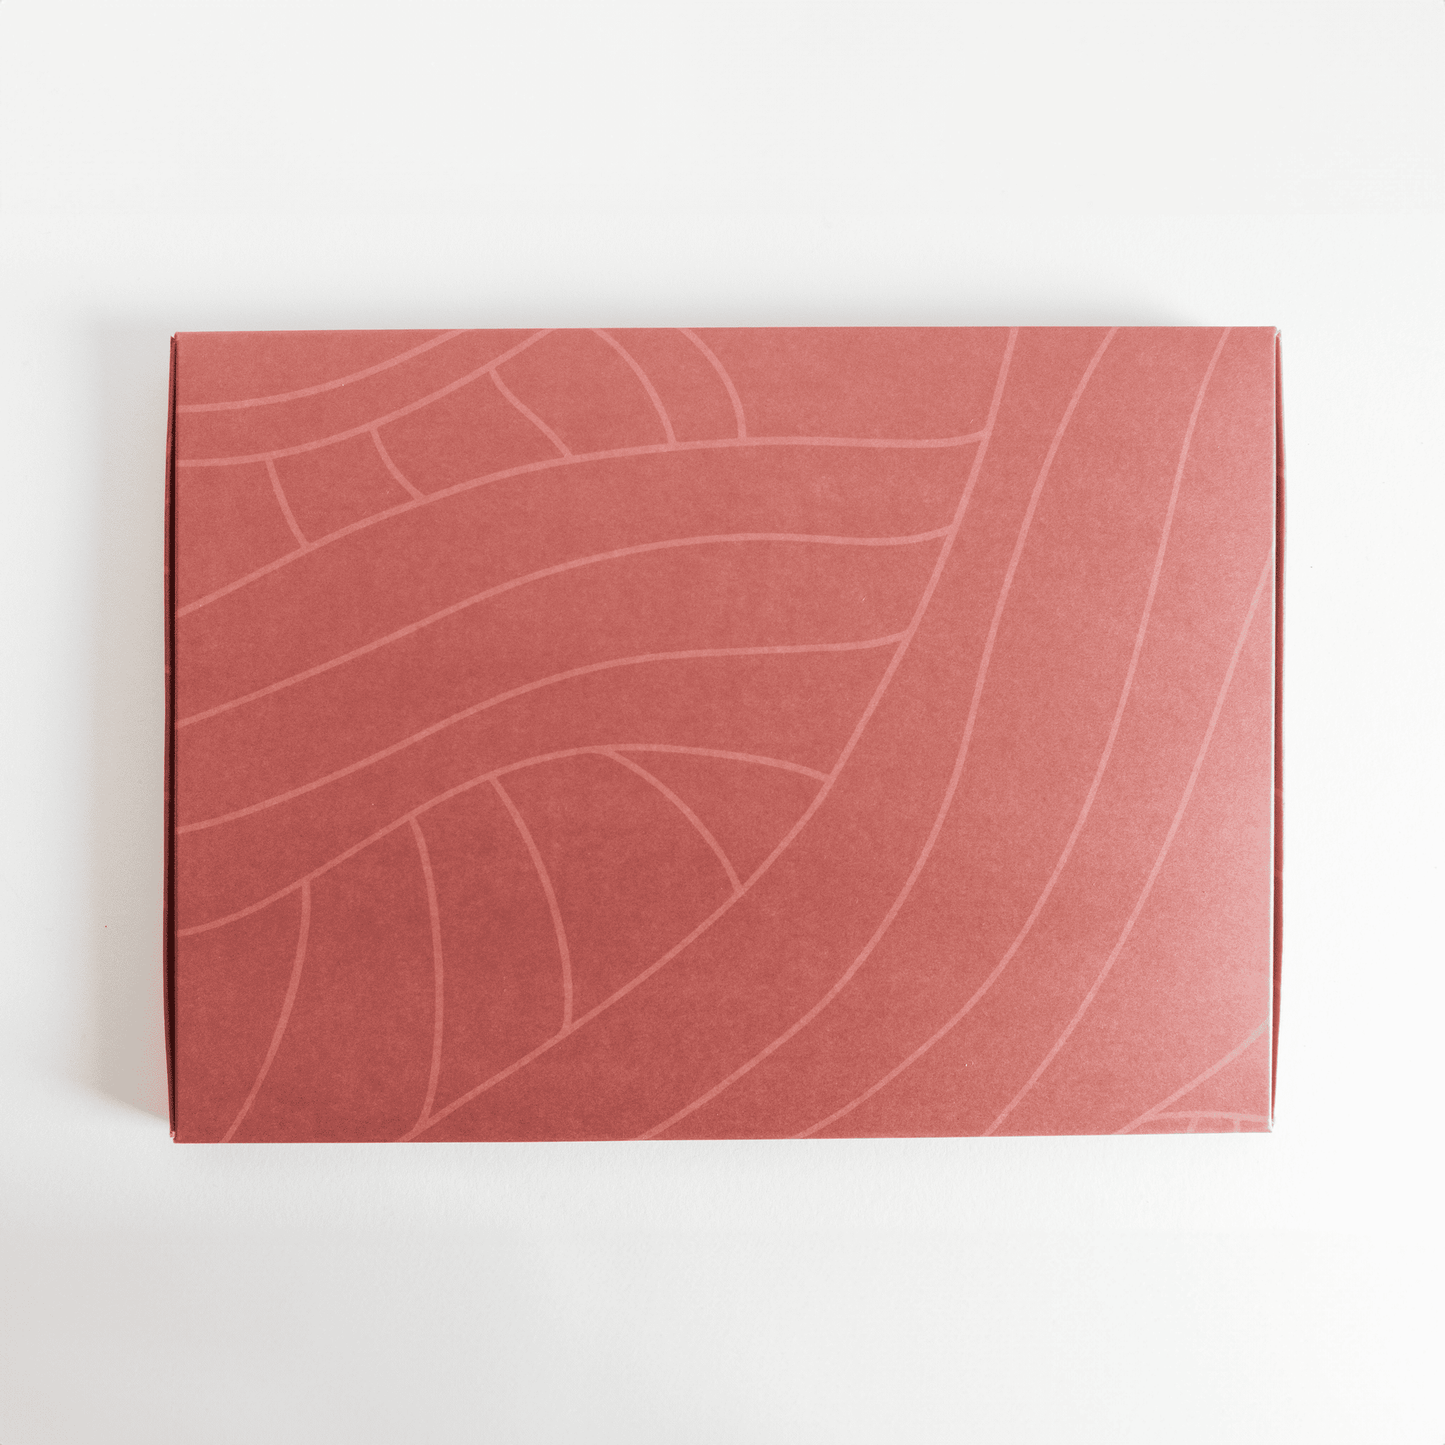 Red ABC Box Cedar Leaf 9.8" x 13.3" - Extra Large with abstract line pattern cover on white background, ideal for small businesses managing their shipping needs from impack.co.